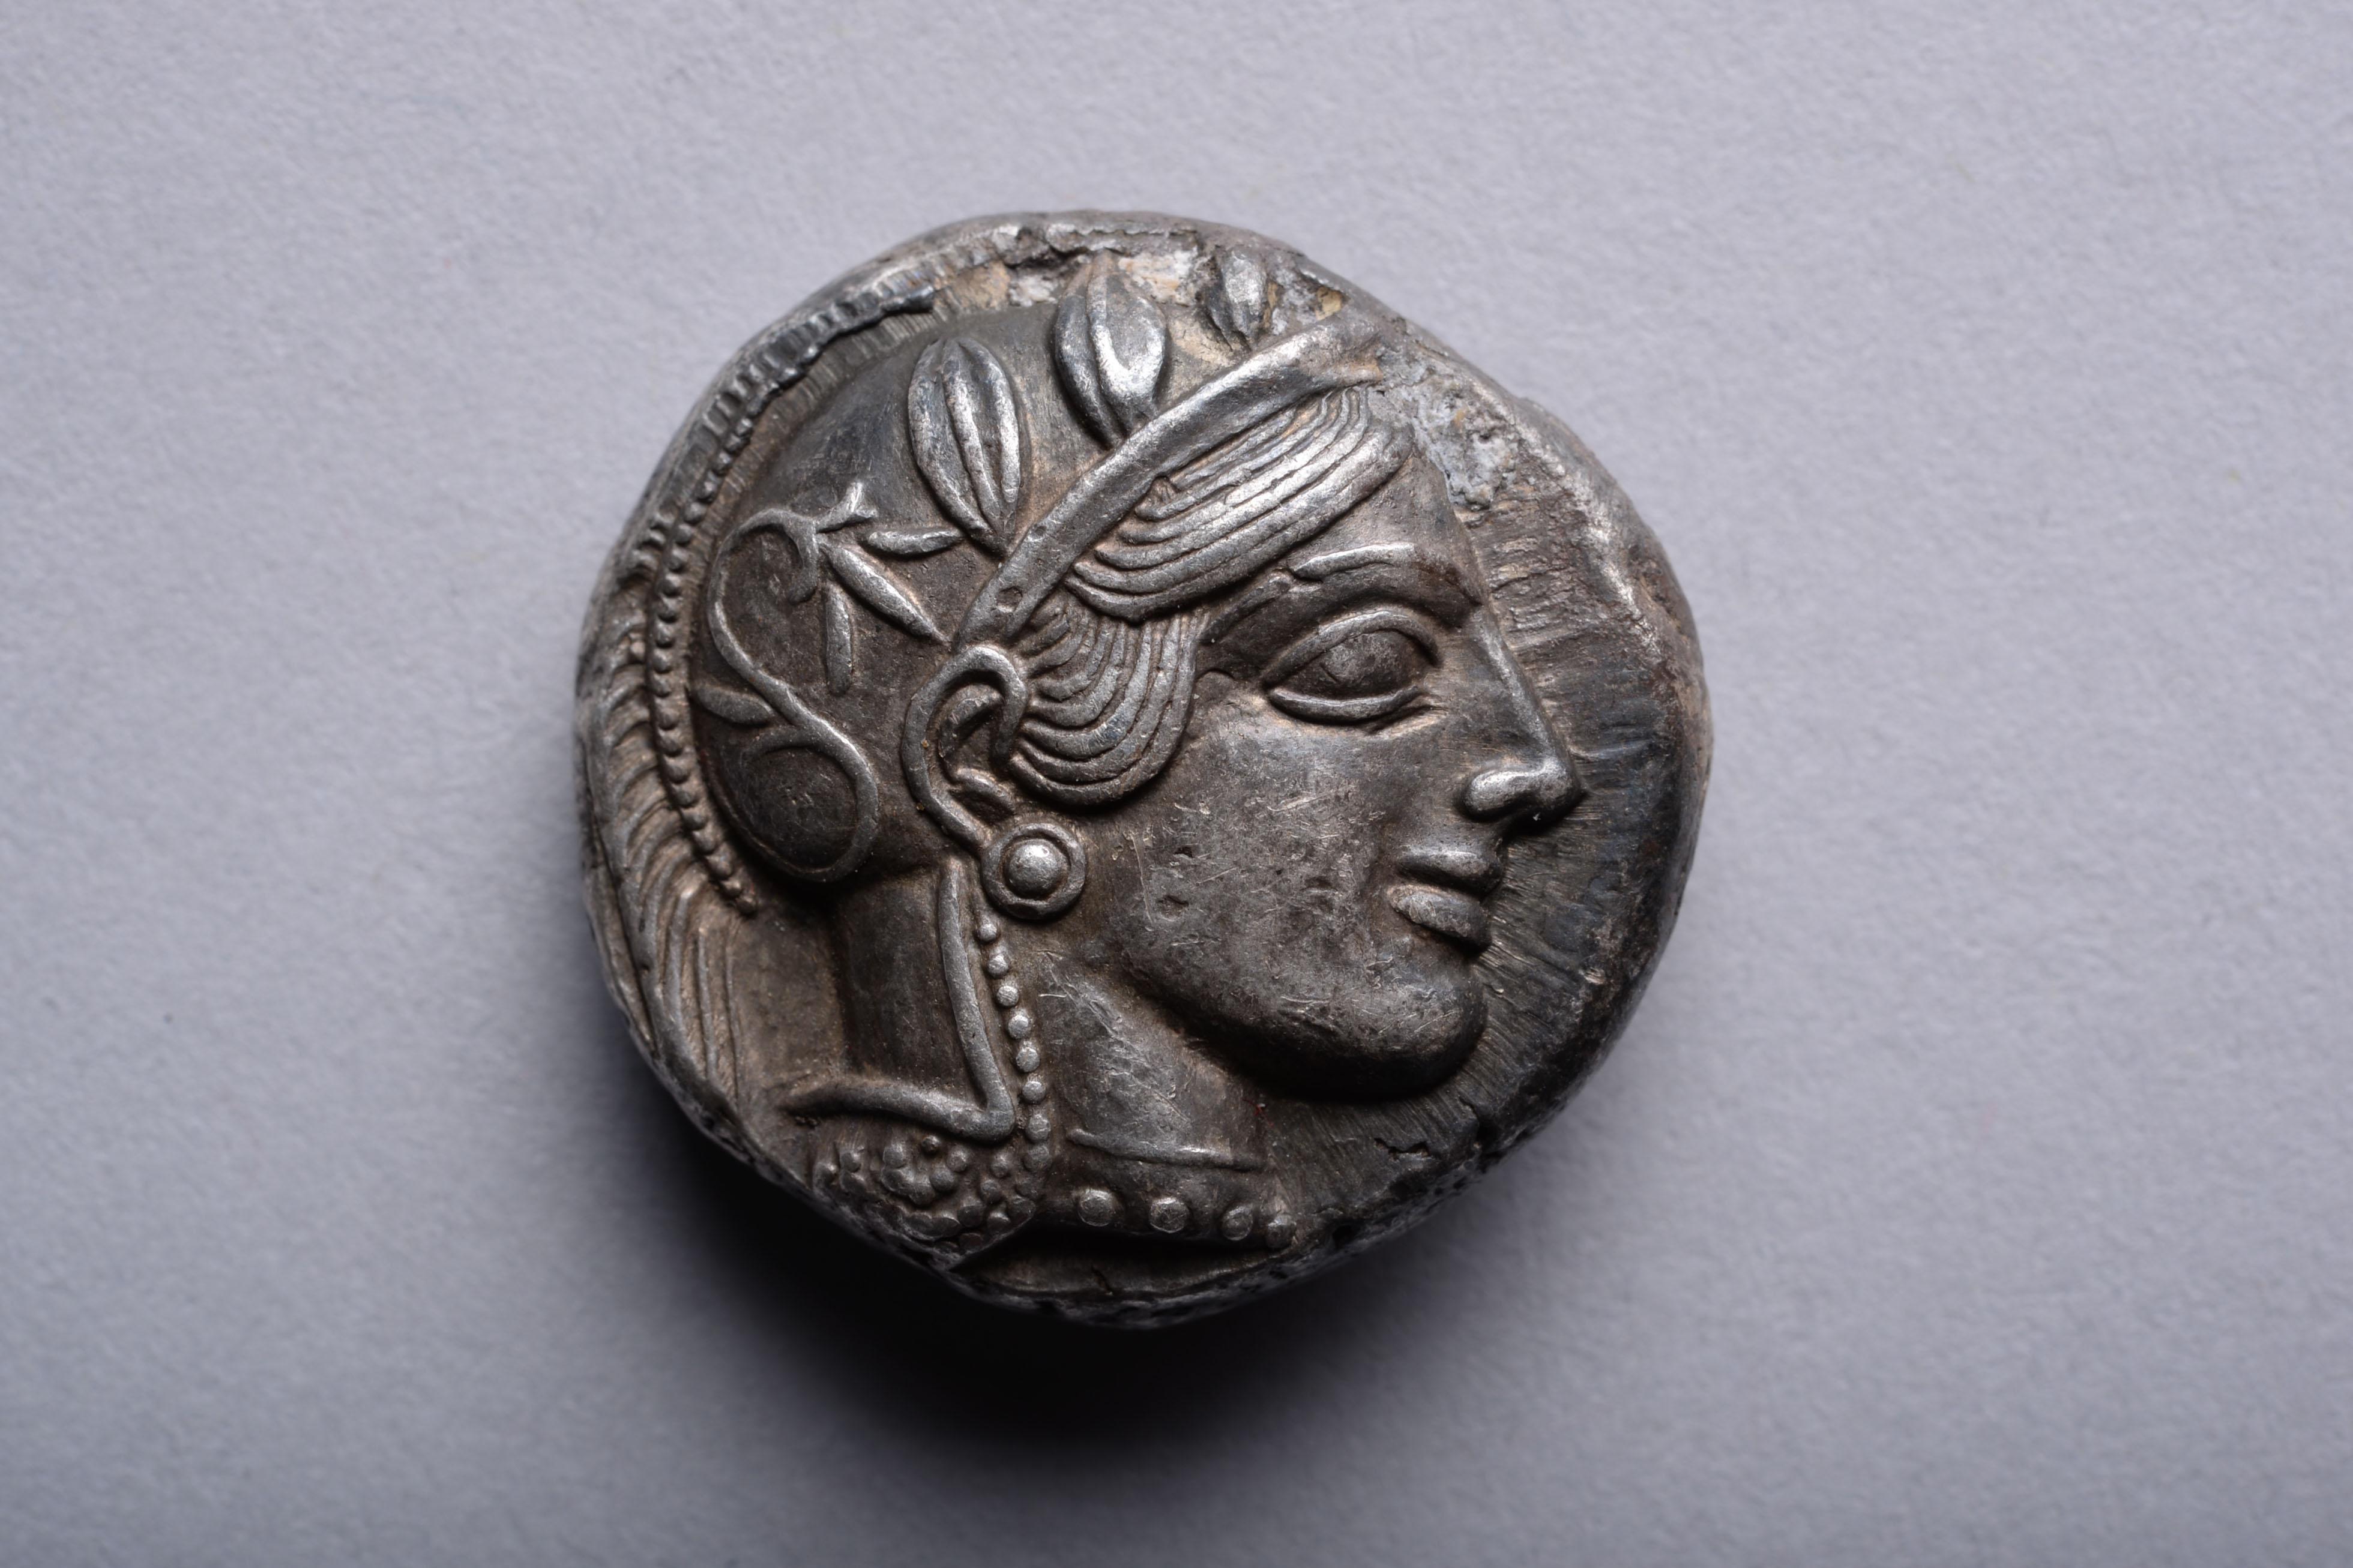 A silver tetradrachm from Athens, circa 454-404 BC.

The front of the coin with Athena, patron deity of Athens. The goddess wears a beaded necklace and crested helmet, decorated with olive leaves and a floral scroll, her hair swept across her